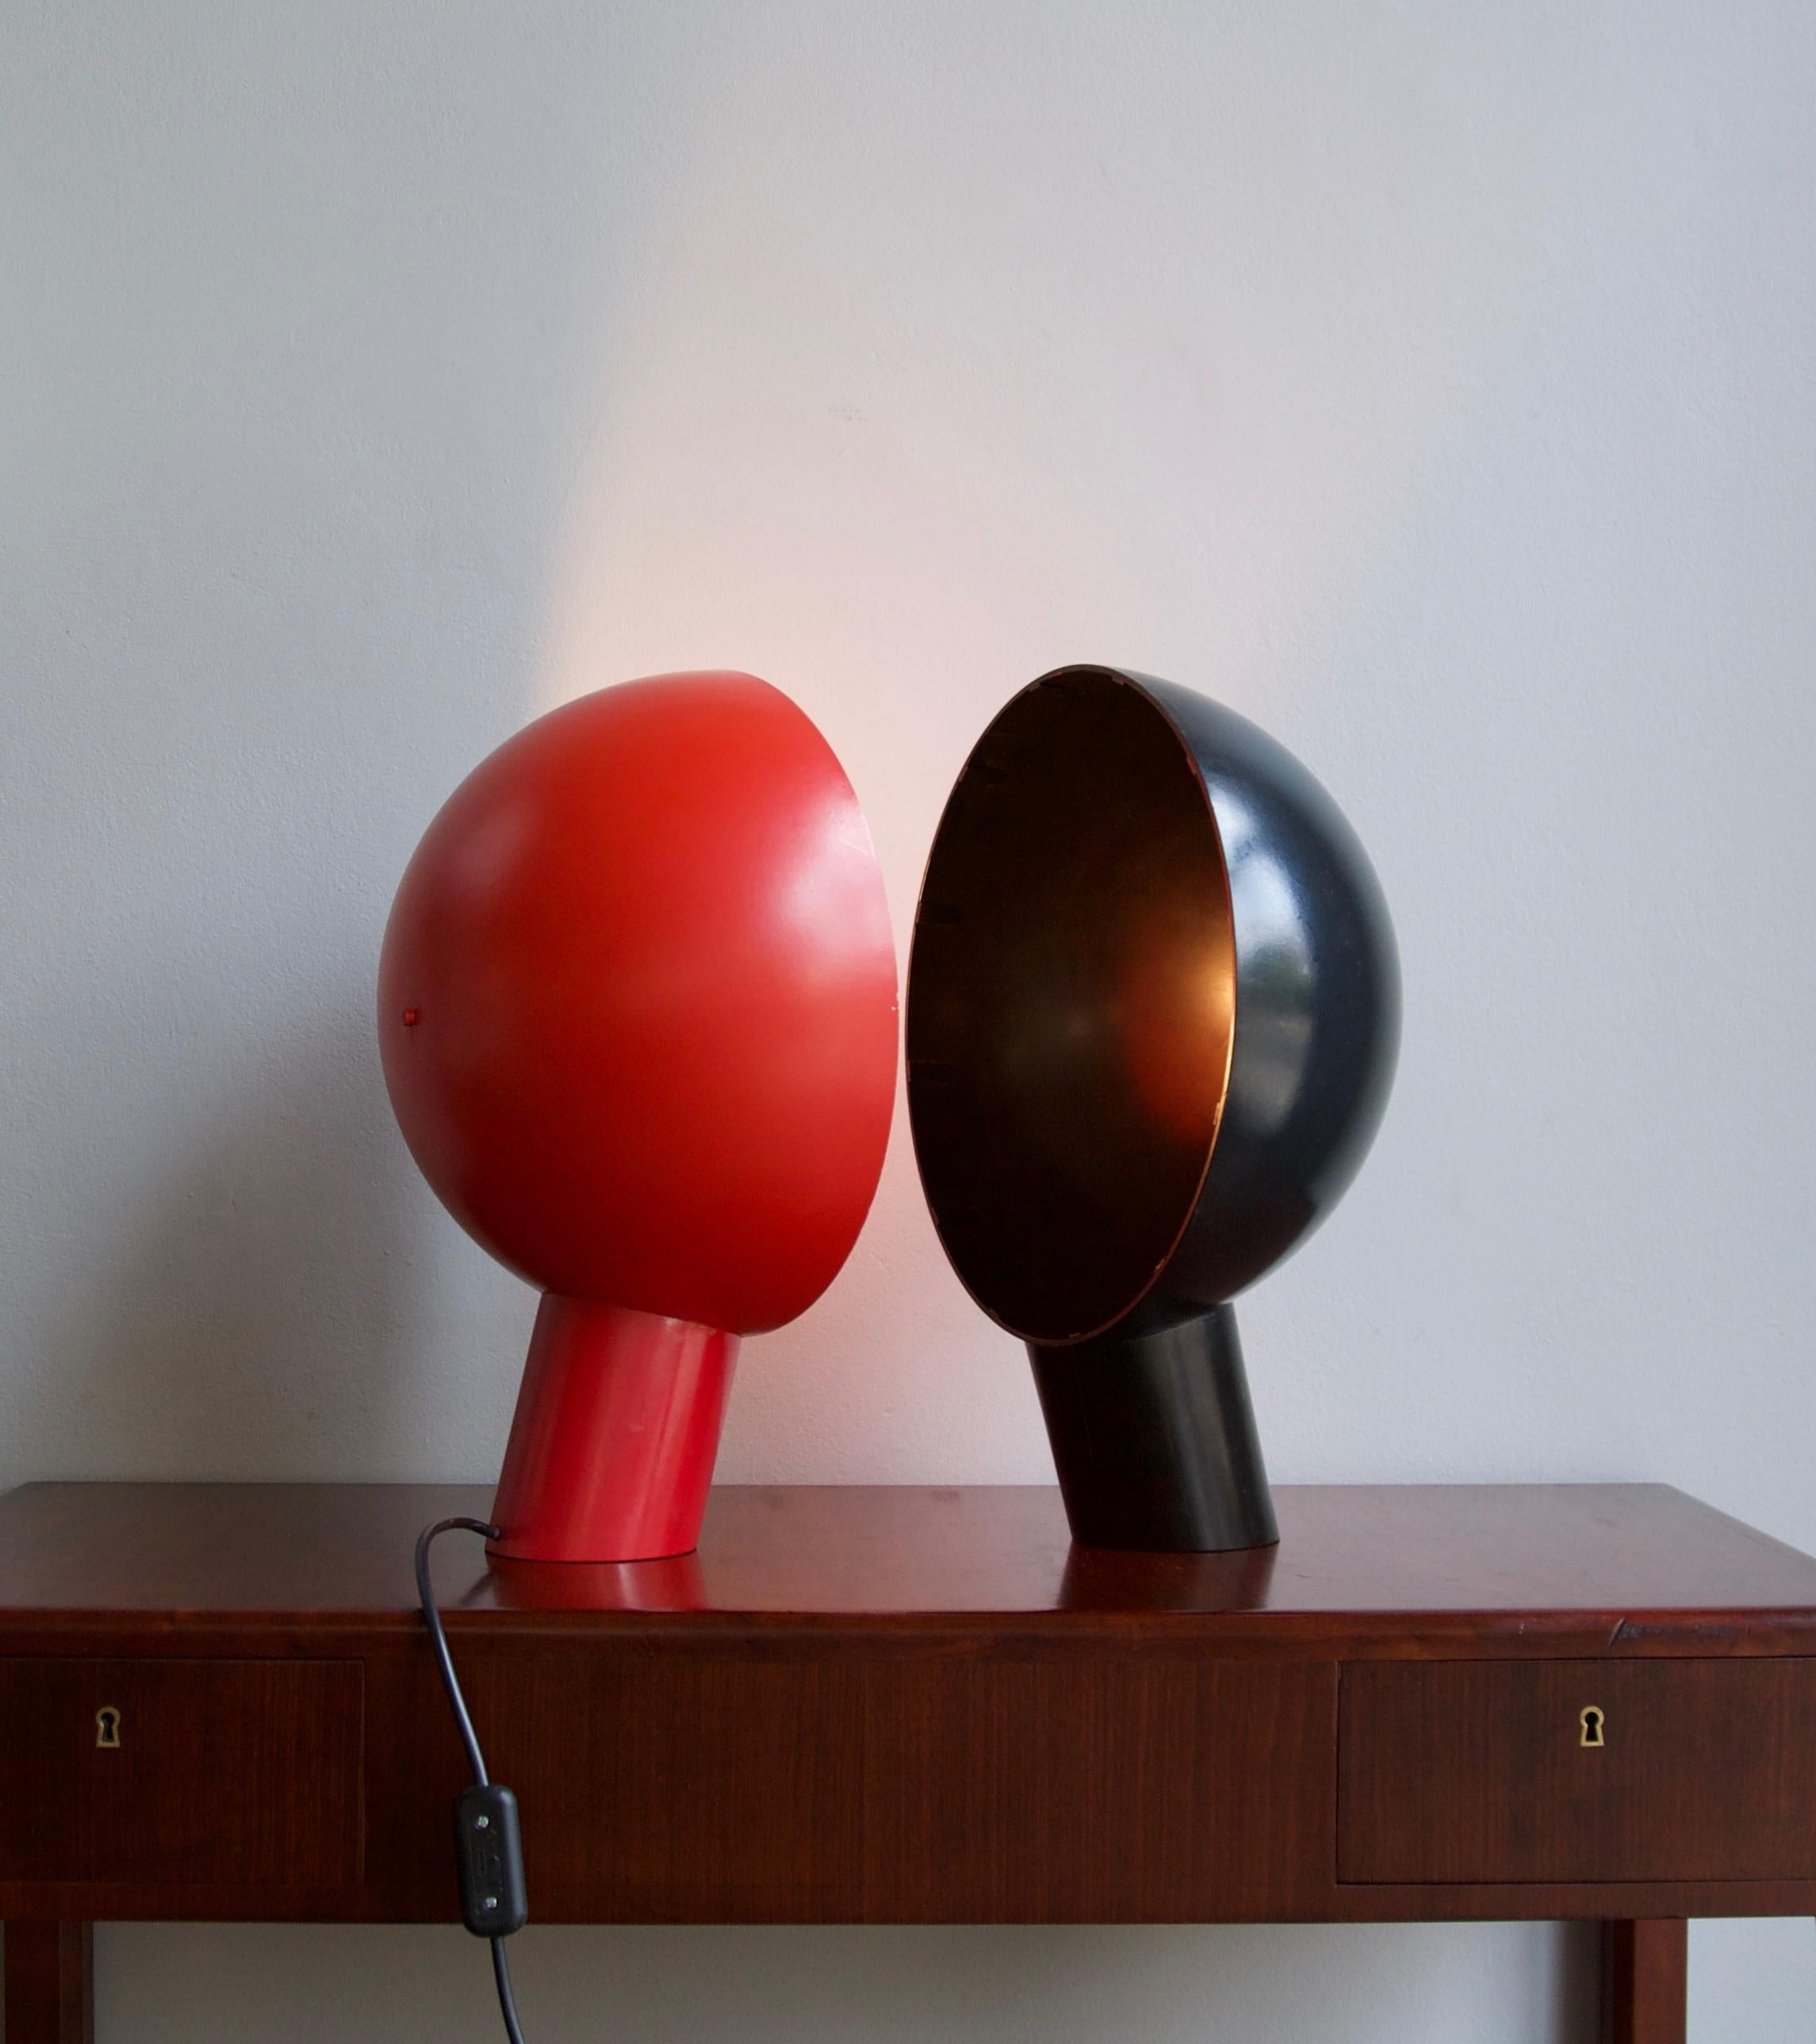 A vintage Czech table light designed and made by Antonín Hepnar, circa 1985. The light, made of two separate parts, is constructed from a re-purposed globe and turned wood. One half is lacquered in black the other in red.
The materials